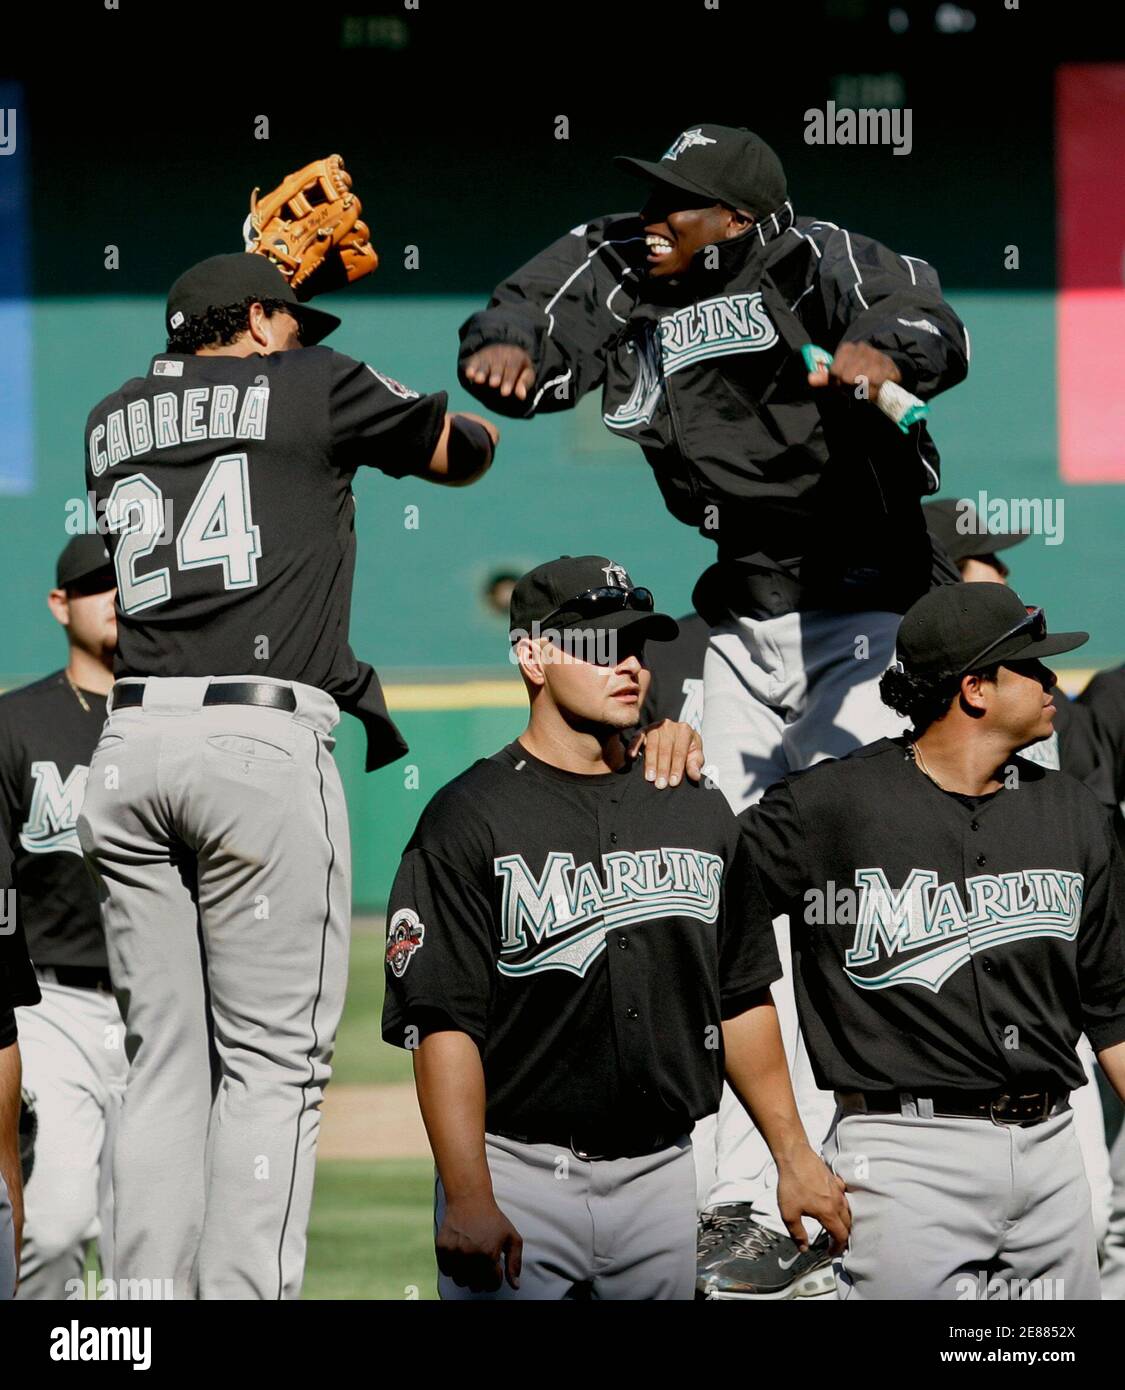 Florida Marlins starting pitcher Dontrelle Willis (top right) and teammate Miguel Cabrera (24) celebrate their win over the Washington Nationals after MLB baseball's Opening Day in Washington, April 2, 2007. Willis got the win, and Cabrera had four RBIs in the game.     REUTERS/Gary Cameron  (UNITED STATES) Stock Photo